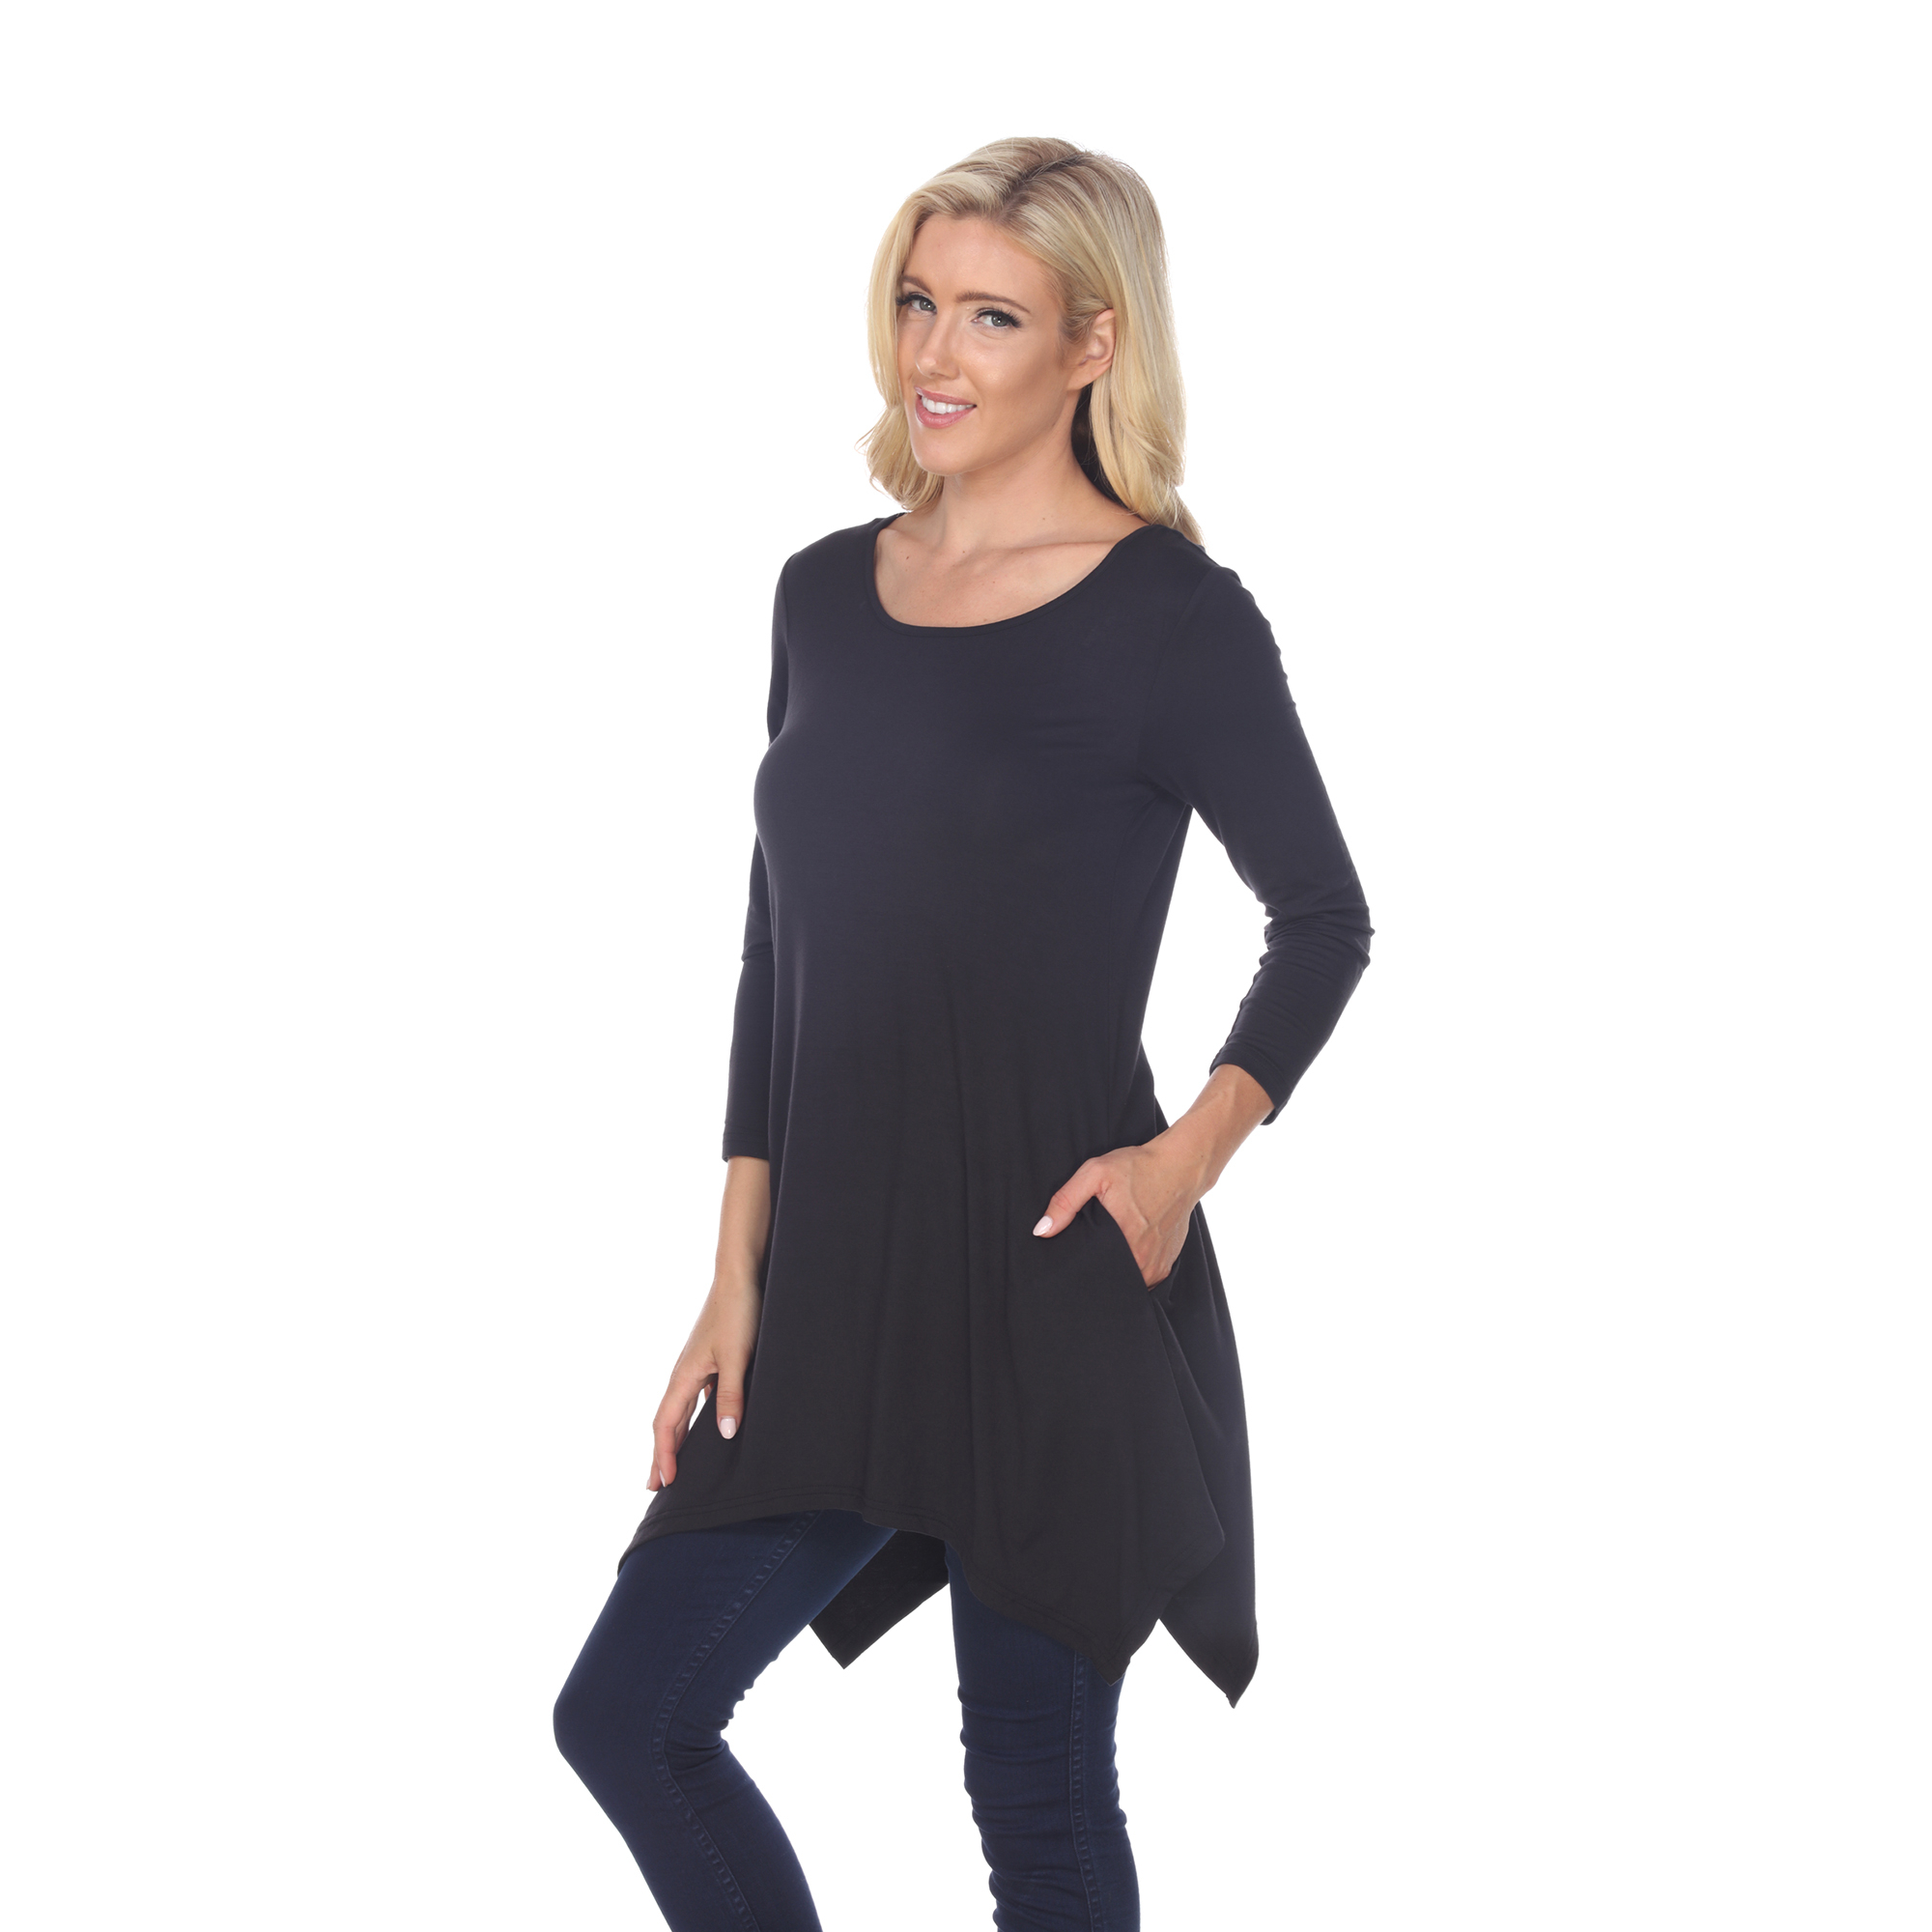 White Mark Women's Quarter Sleeve Tunic Top With Pockets - Charcoal, Large